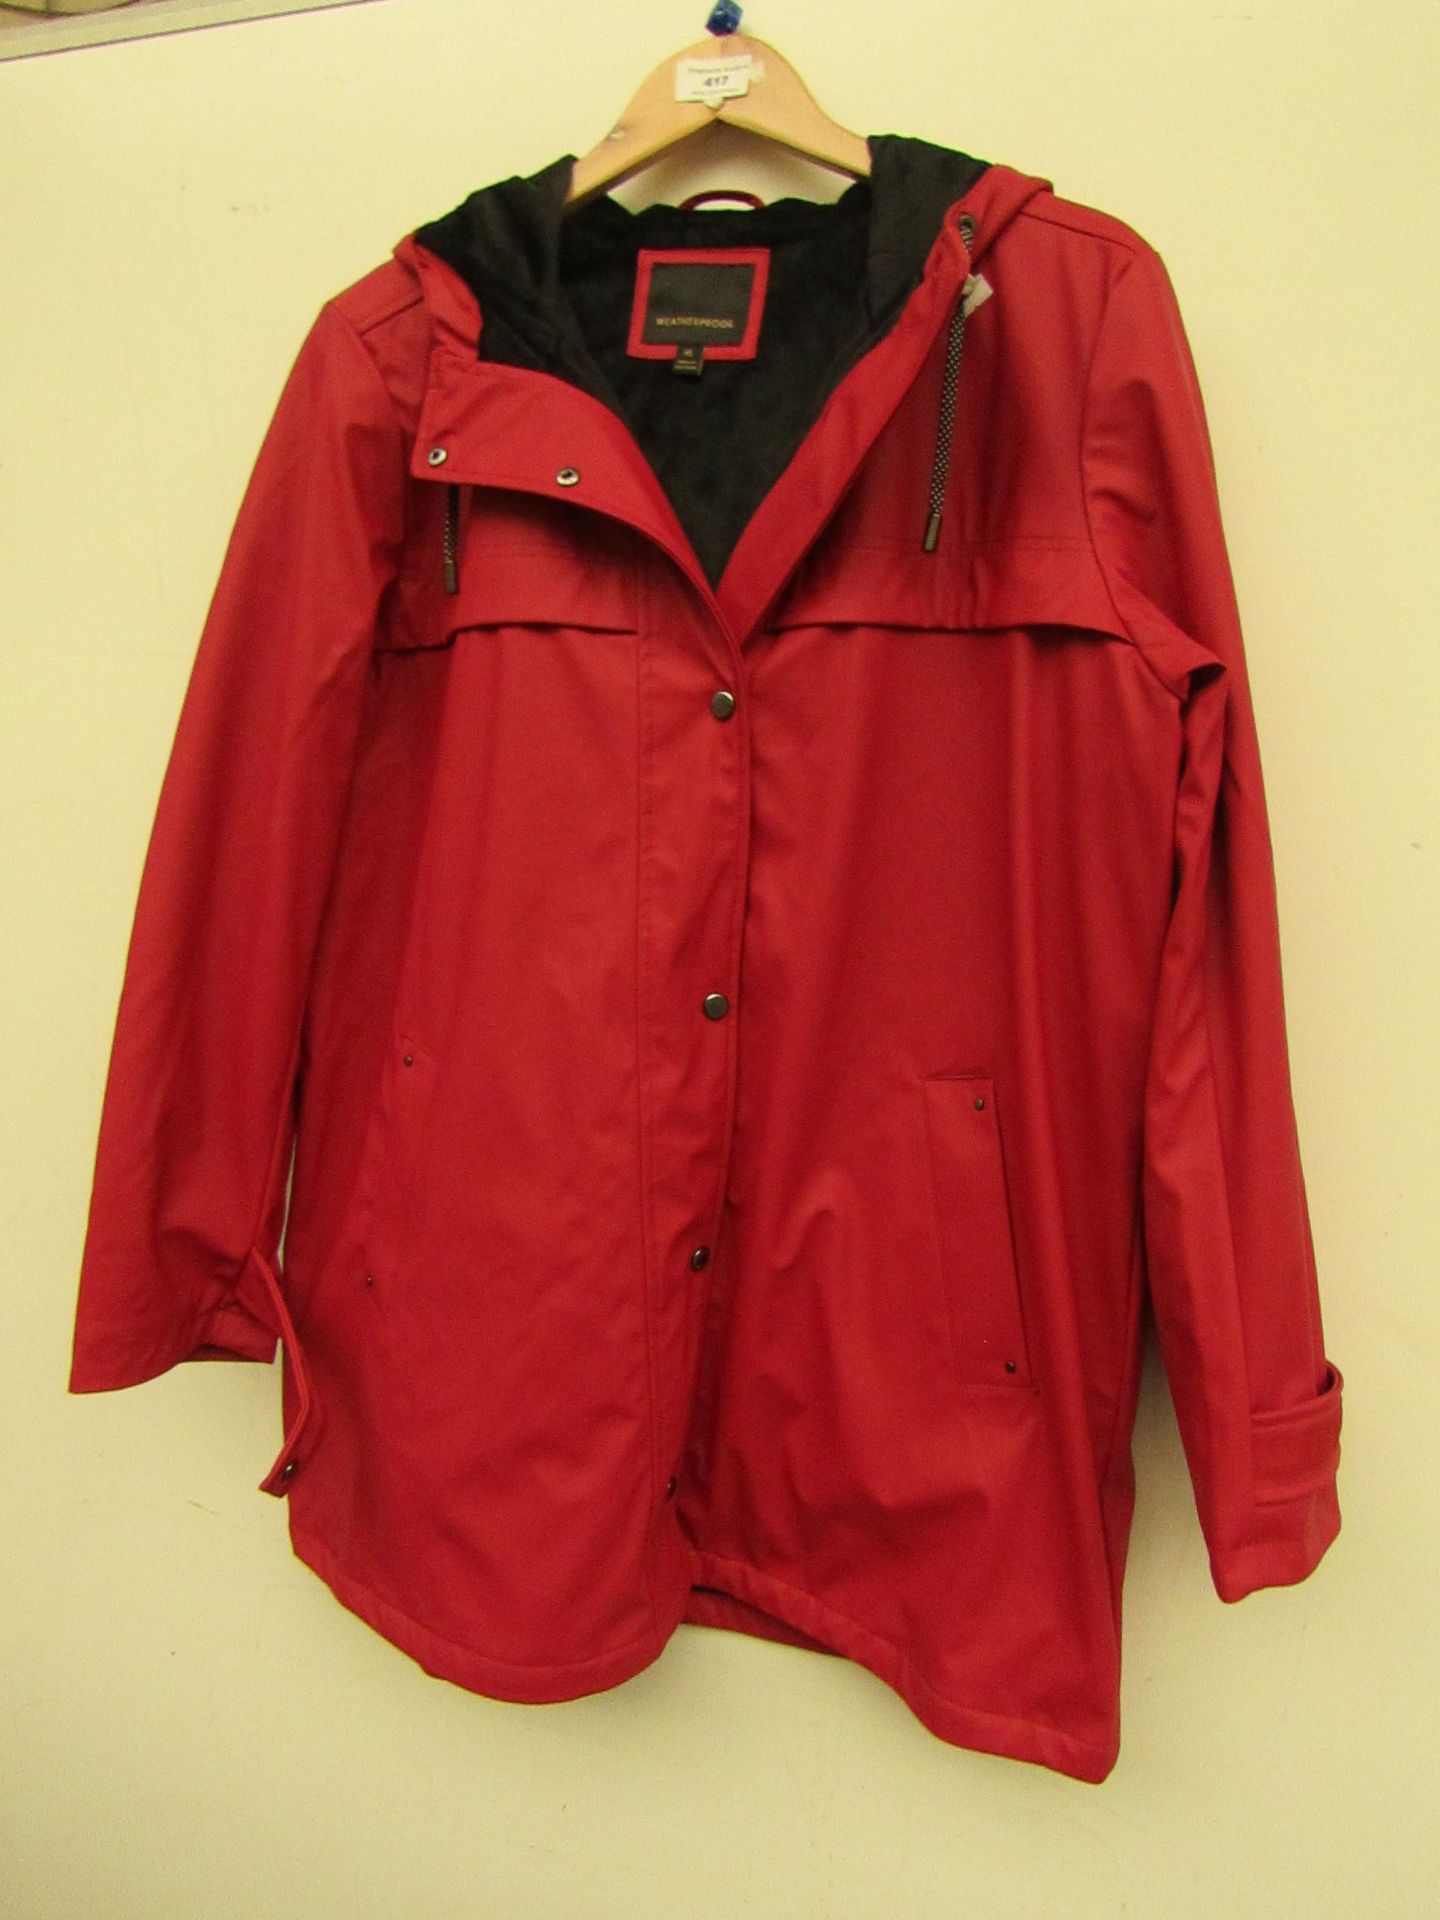 WaterProof - Red Coat - Size XL - Good Condition.